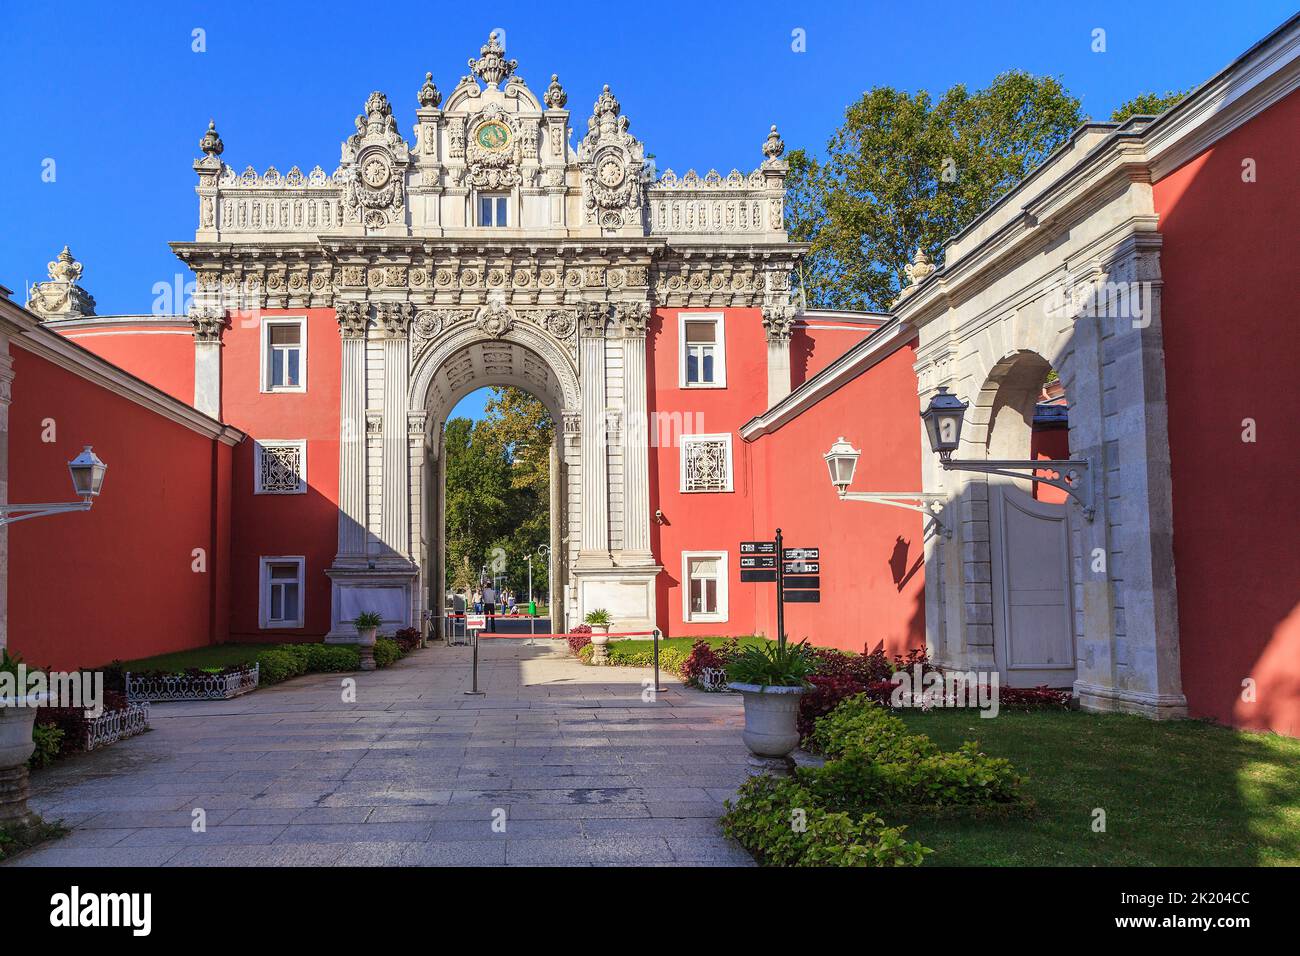 ISTANBUL, TURKEY - SEPTEMBER 13, 2017: This is a view of the Main Gate of the Dolmabahche Palace from the side of the palace and park complex. Stock Photo